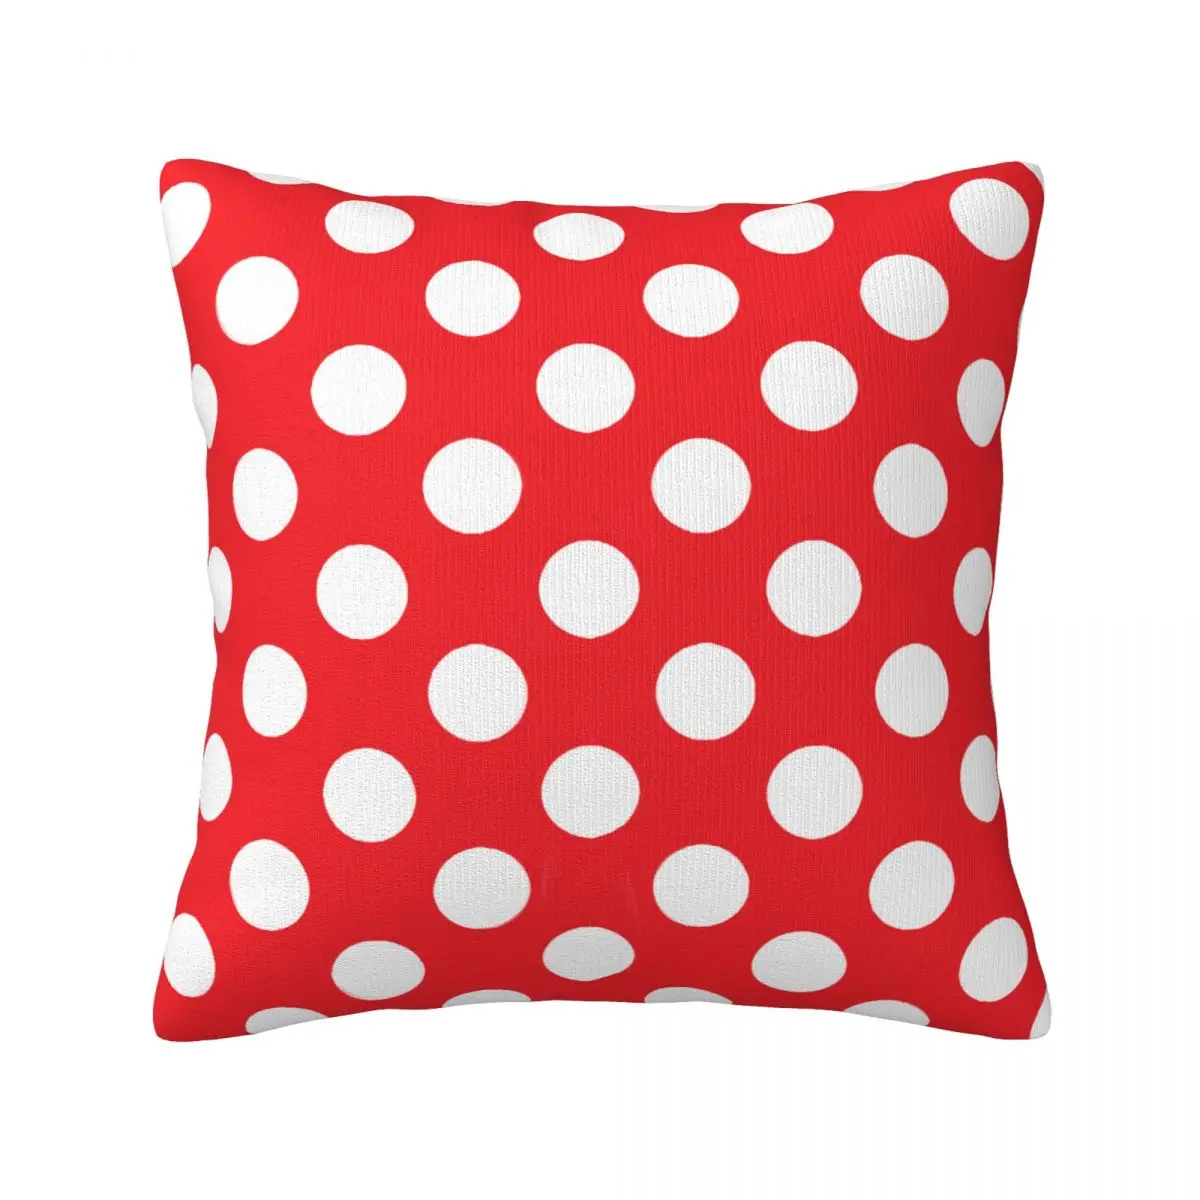 

Red And White Polka Dot Throw Pillow Cover Decorative Pillow Covers Home Pillows Shells Cushion Cover Zippered Pillowcase